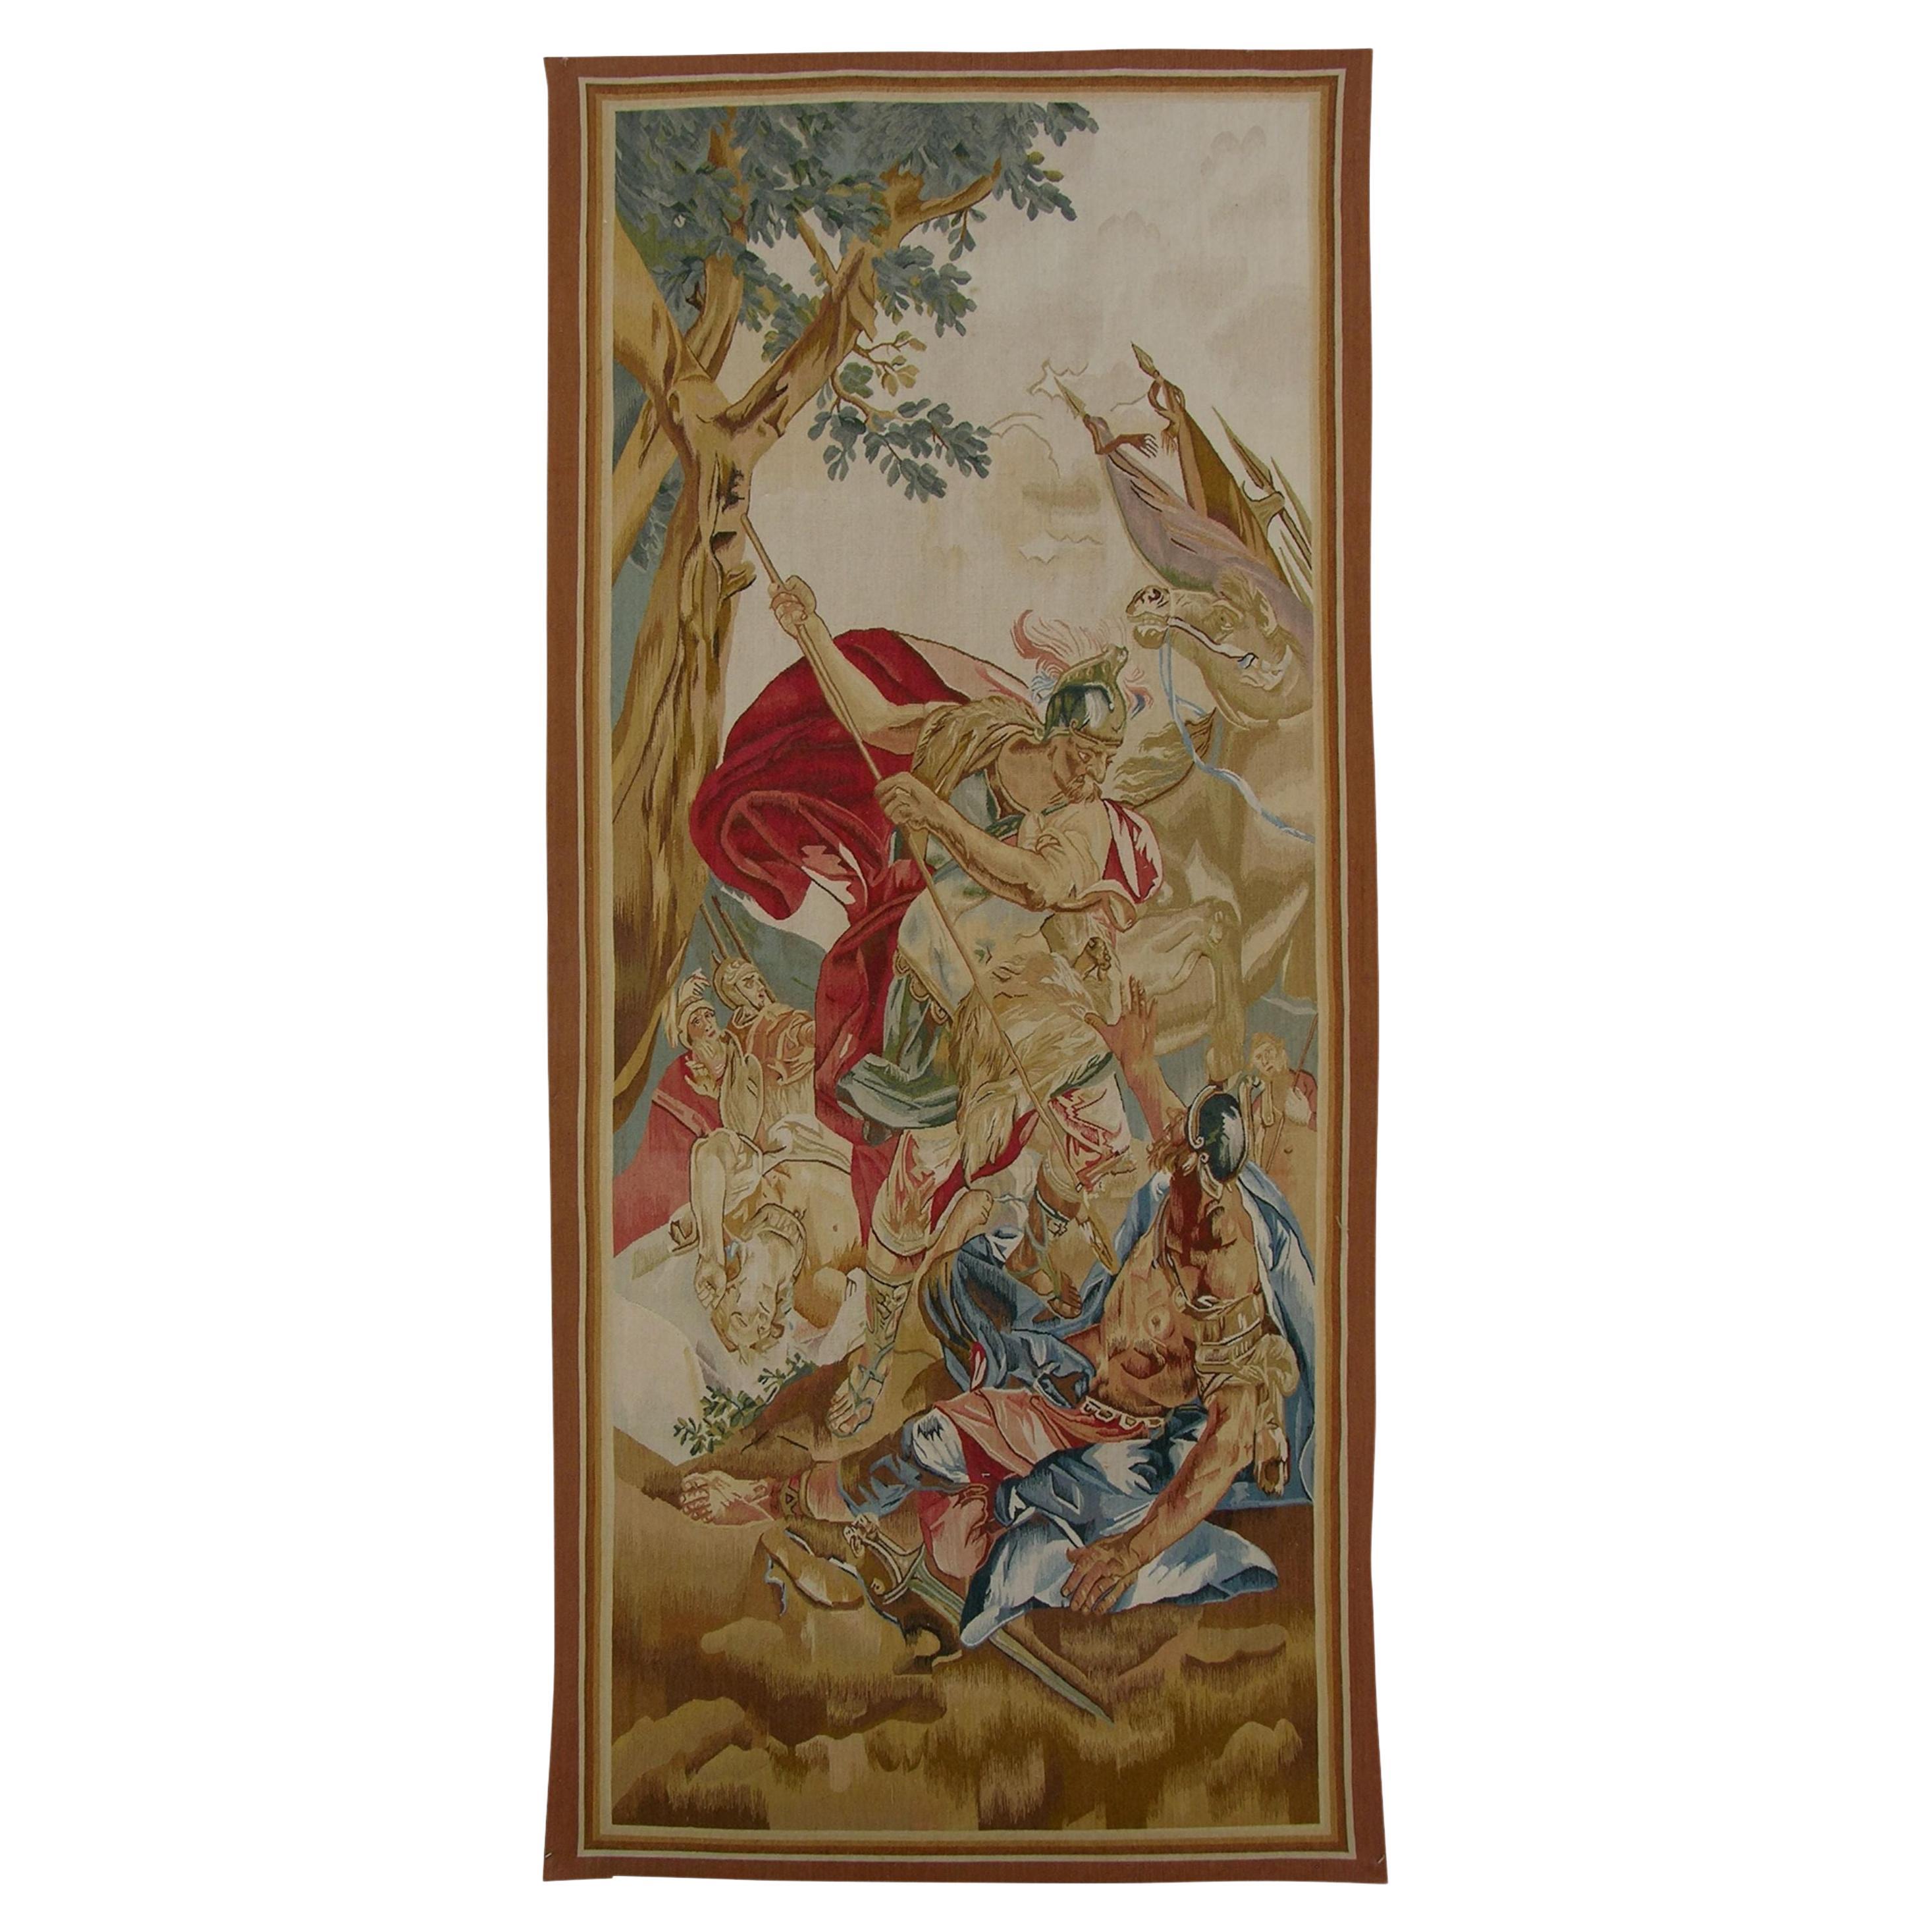 Vintage Tapestry Depicting Royal Soldiers in Battle 8' X 3'6"